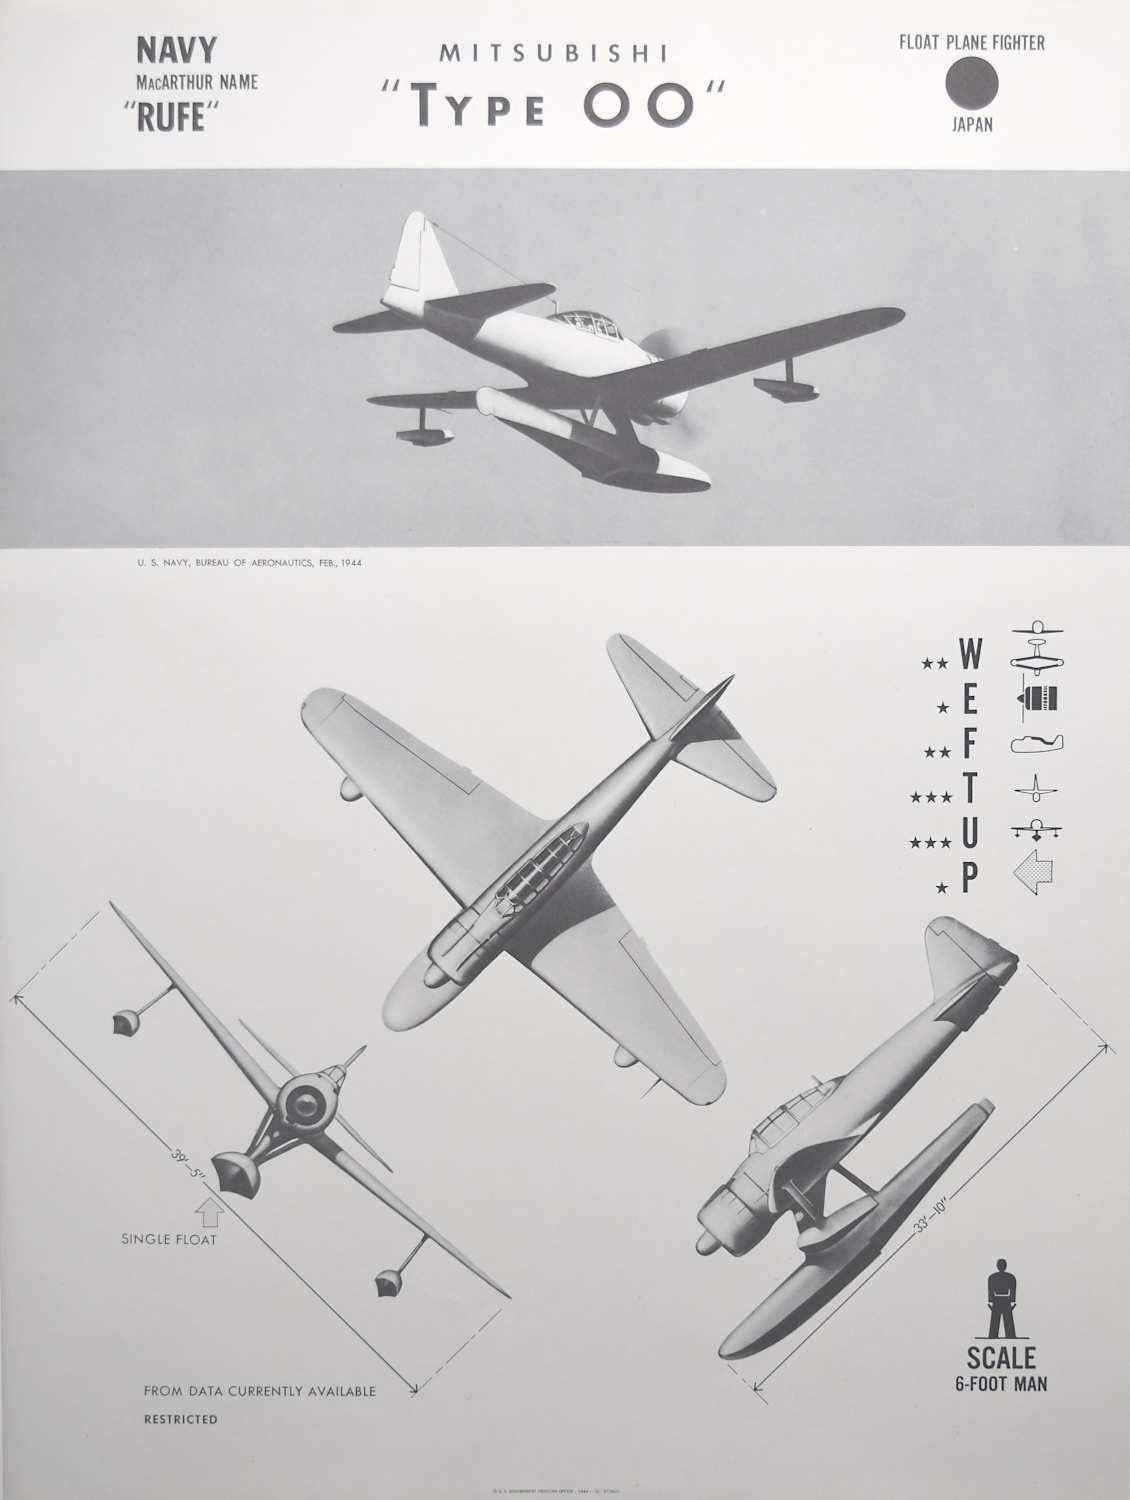 1942 Mitsubishi Zero fighter "Type OO" Japanese float identification poster WW2 - Print by Unknown